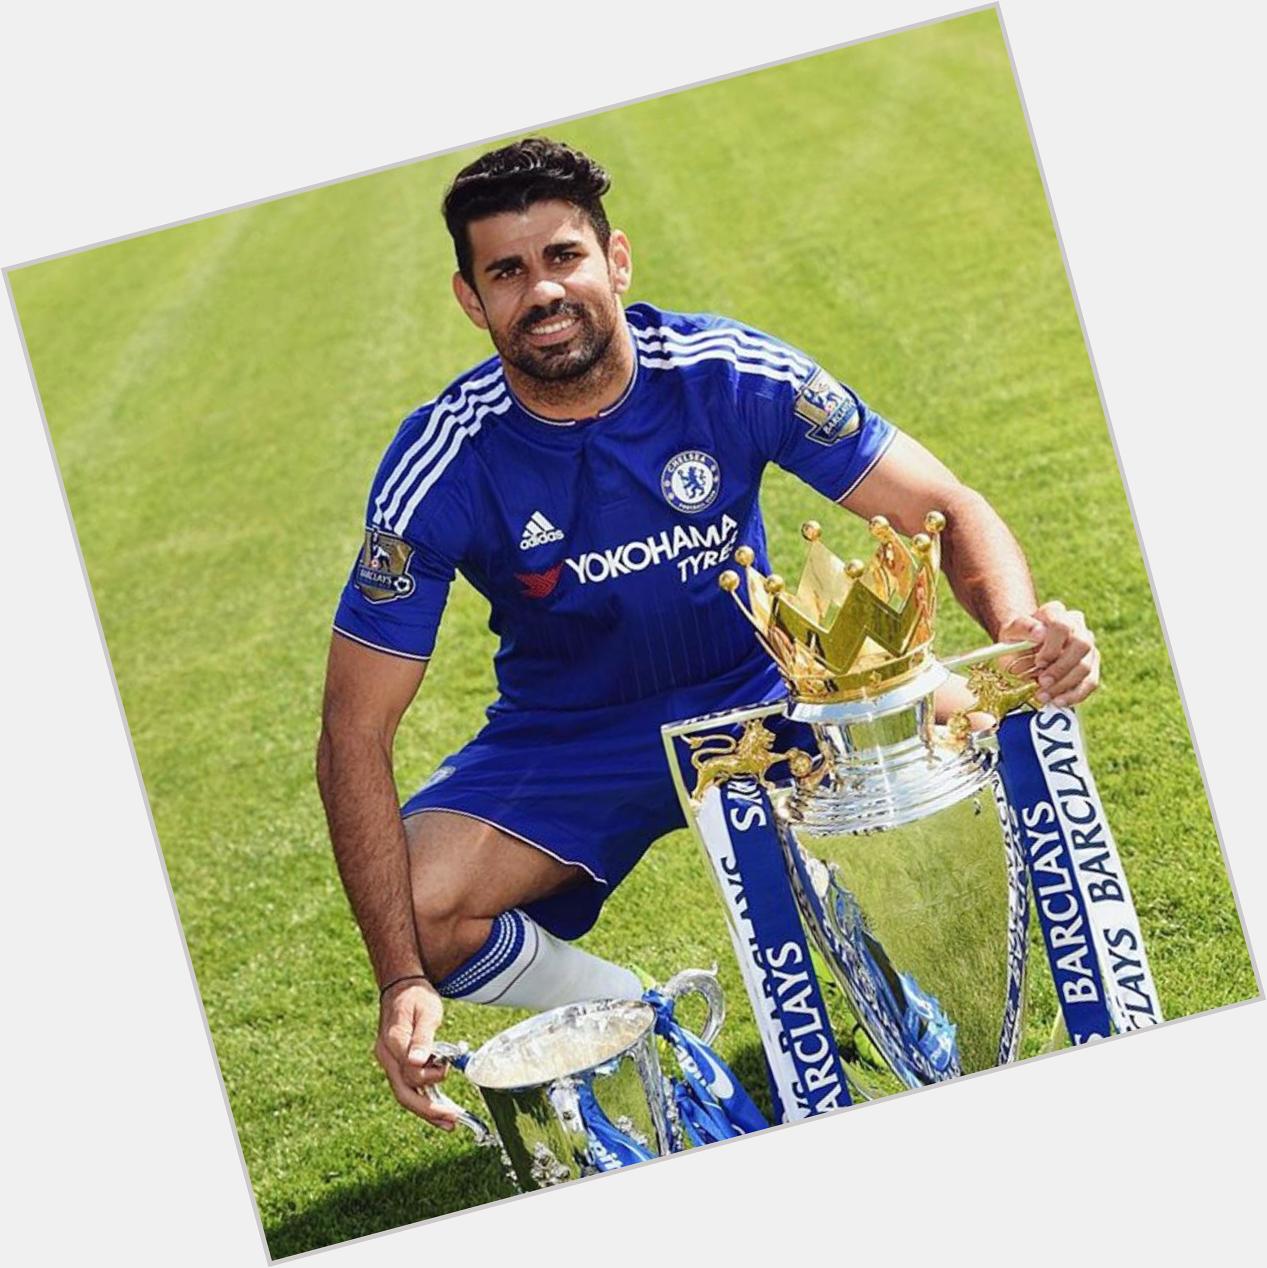 Happy birthday to Diego Costa who turns 27 today! 